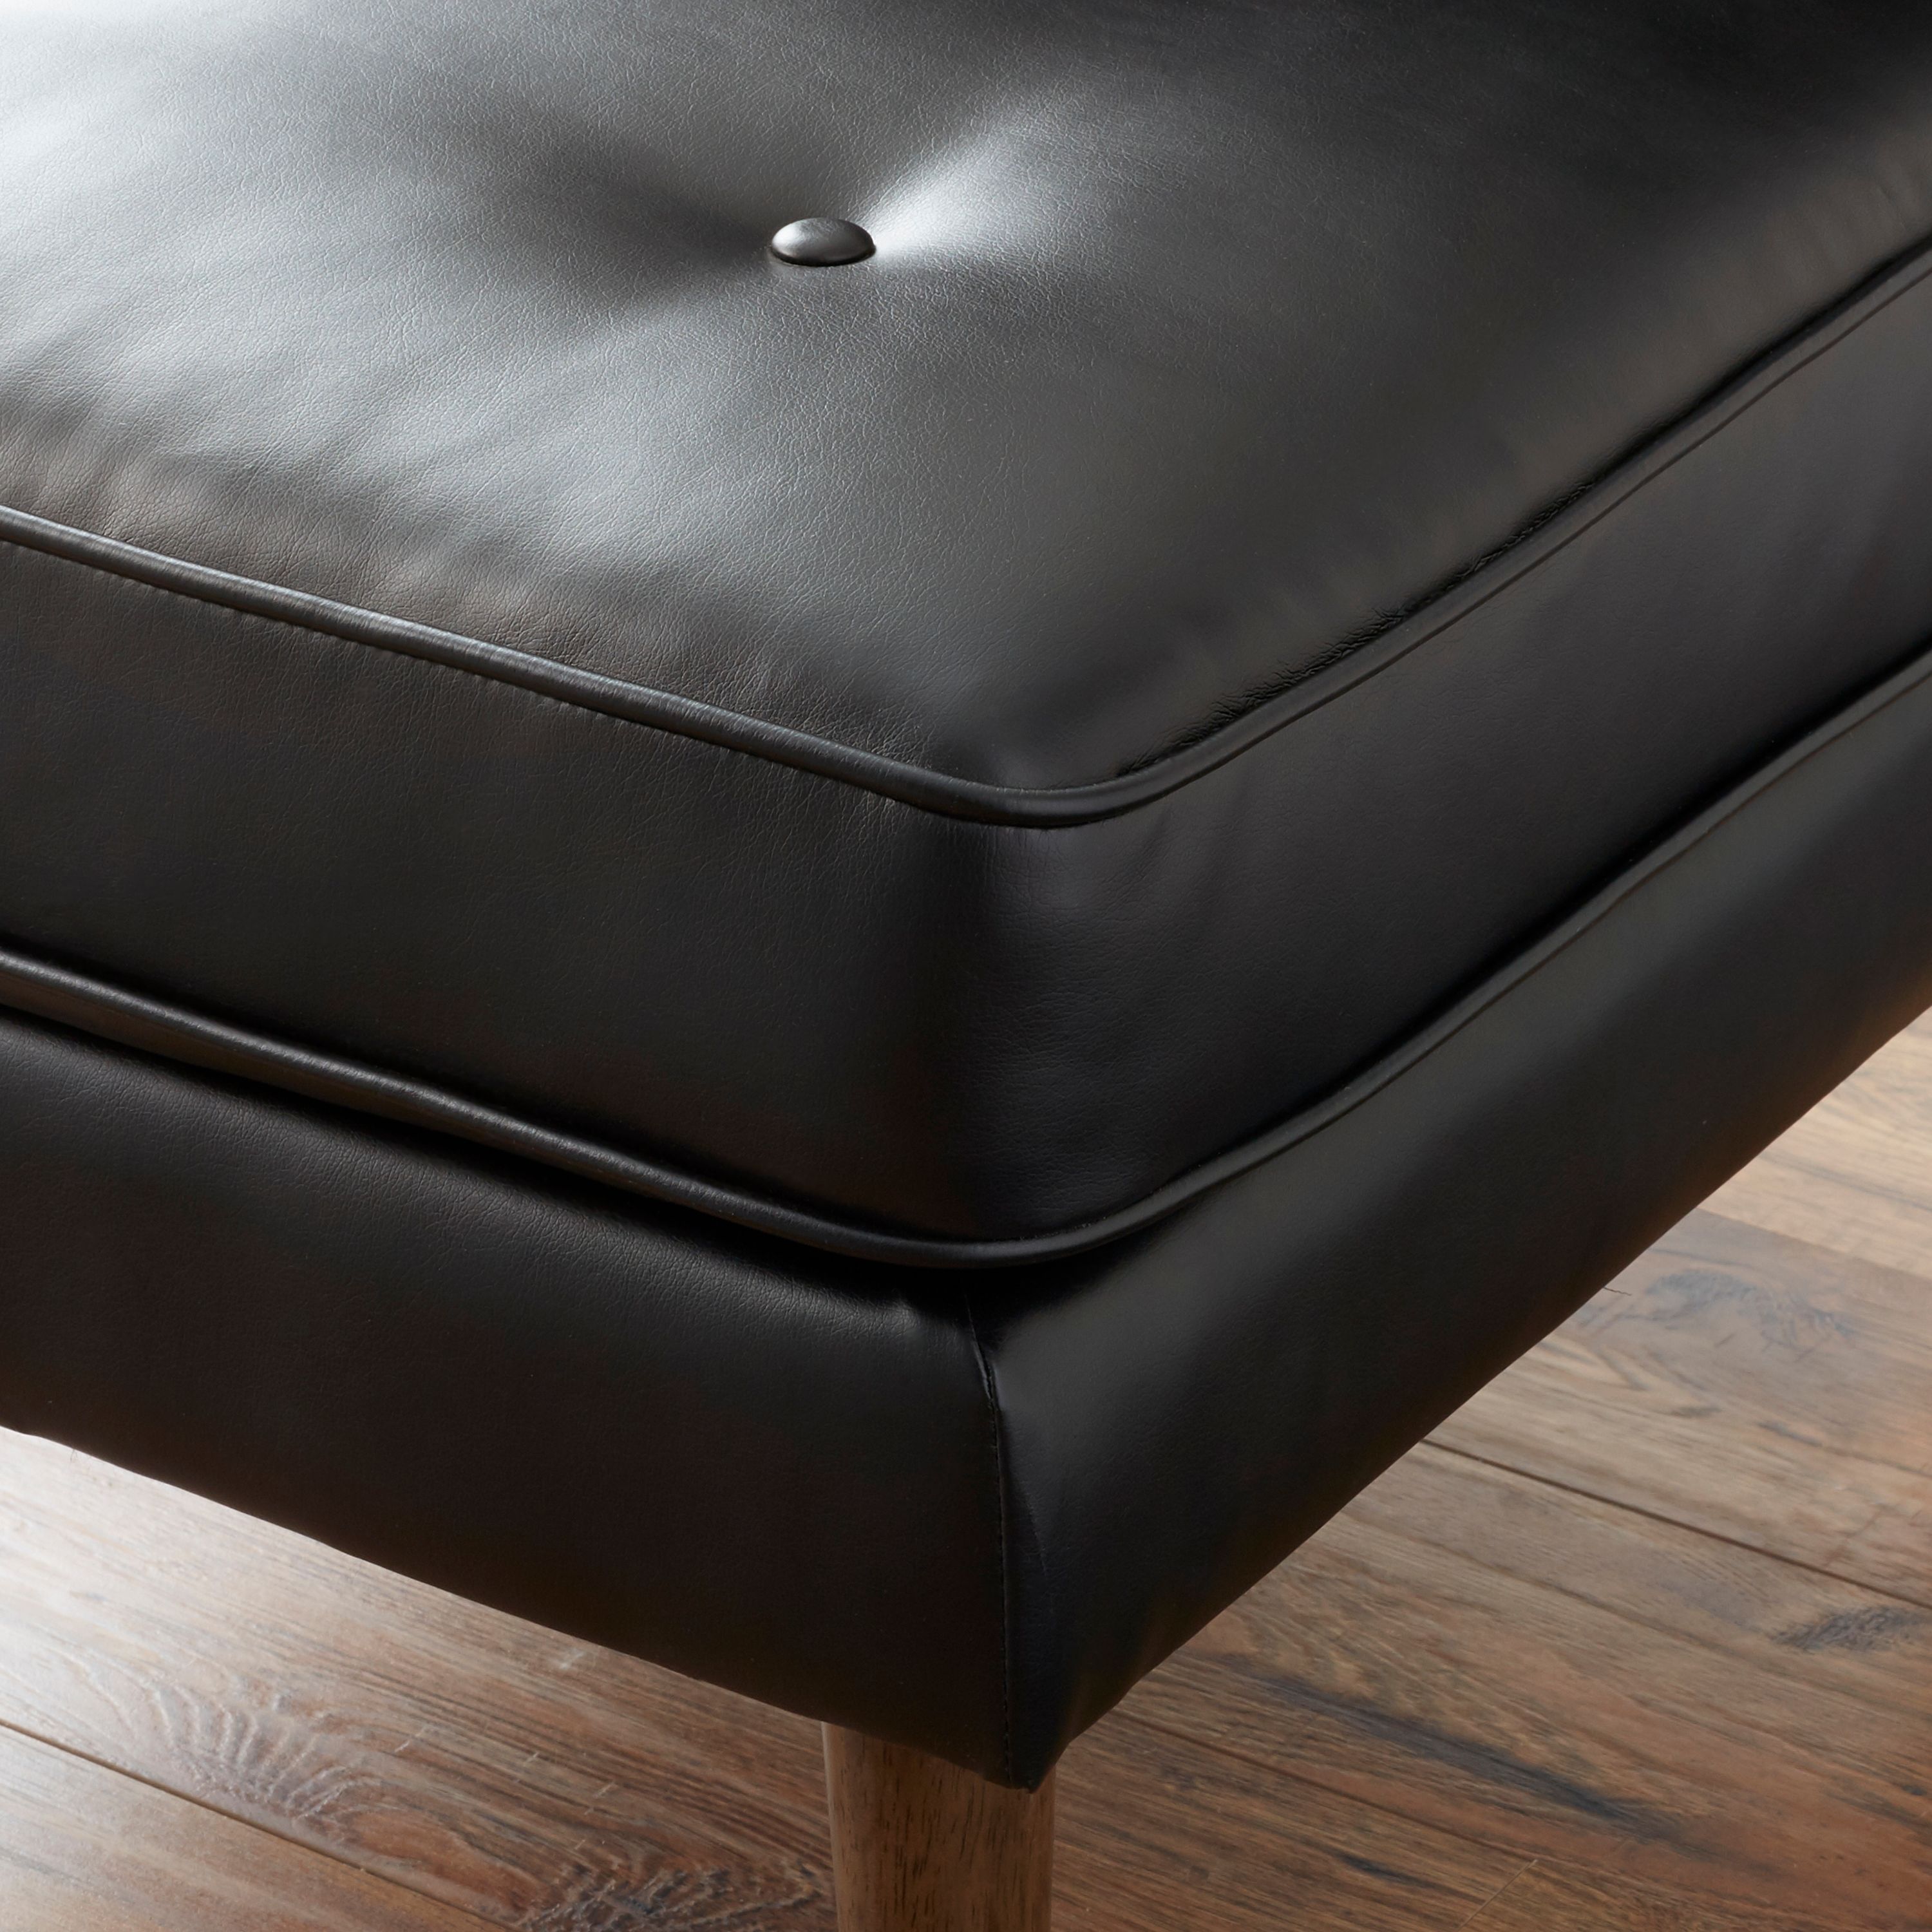 Better Homes & Gardens Colton Upholstered Bench, Black Faux Leather - image 3 of 4